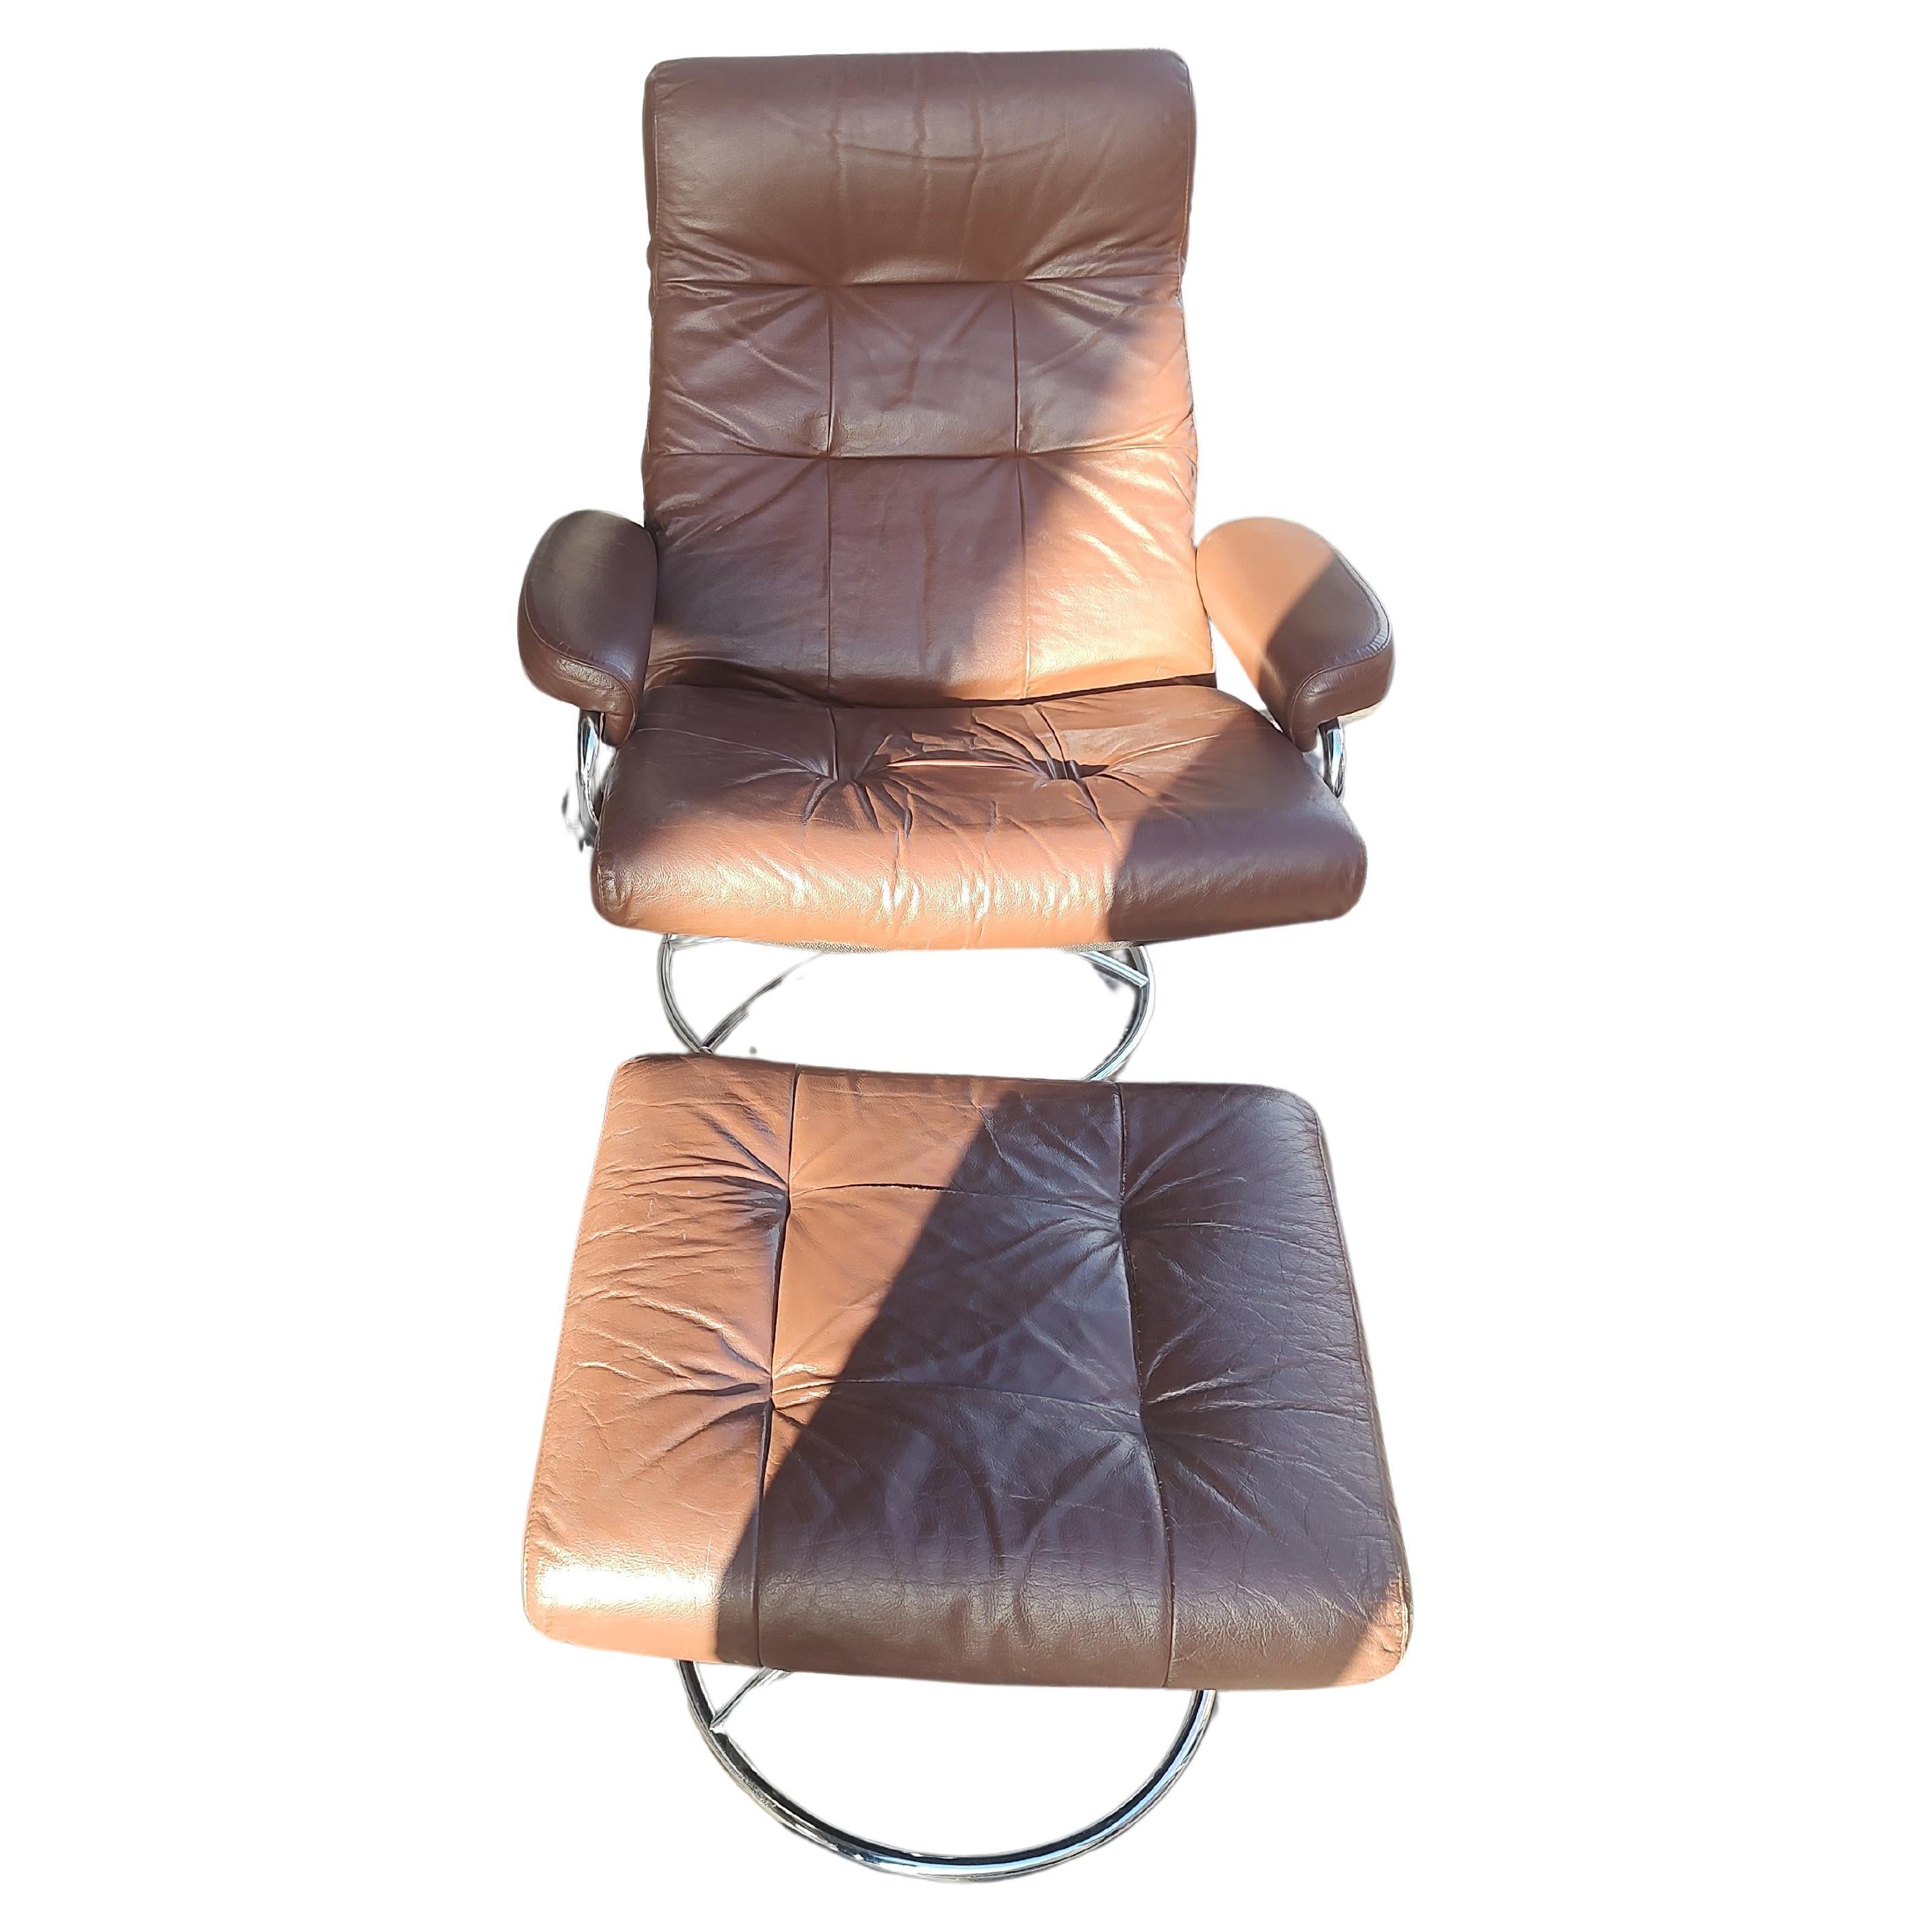 Fabulous c1970 Stressless Lounge recliner with ottoman by Ekornes of Norway. Brown leather is in excellent condition with a minor crease on the ottoman. Chrome is bright and shiny. Mechanicals are excellent. Ottoman is 22 x 19 x 16 h
Sold as a set 